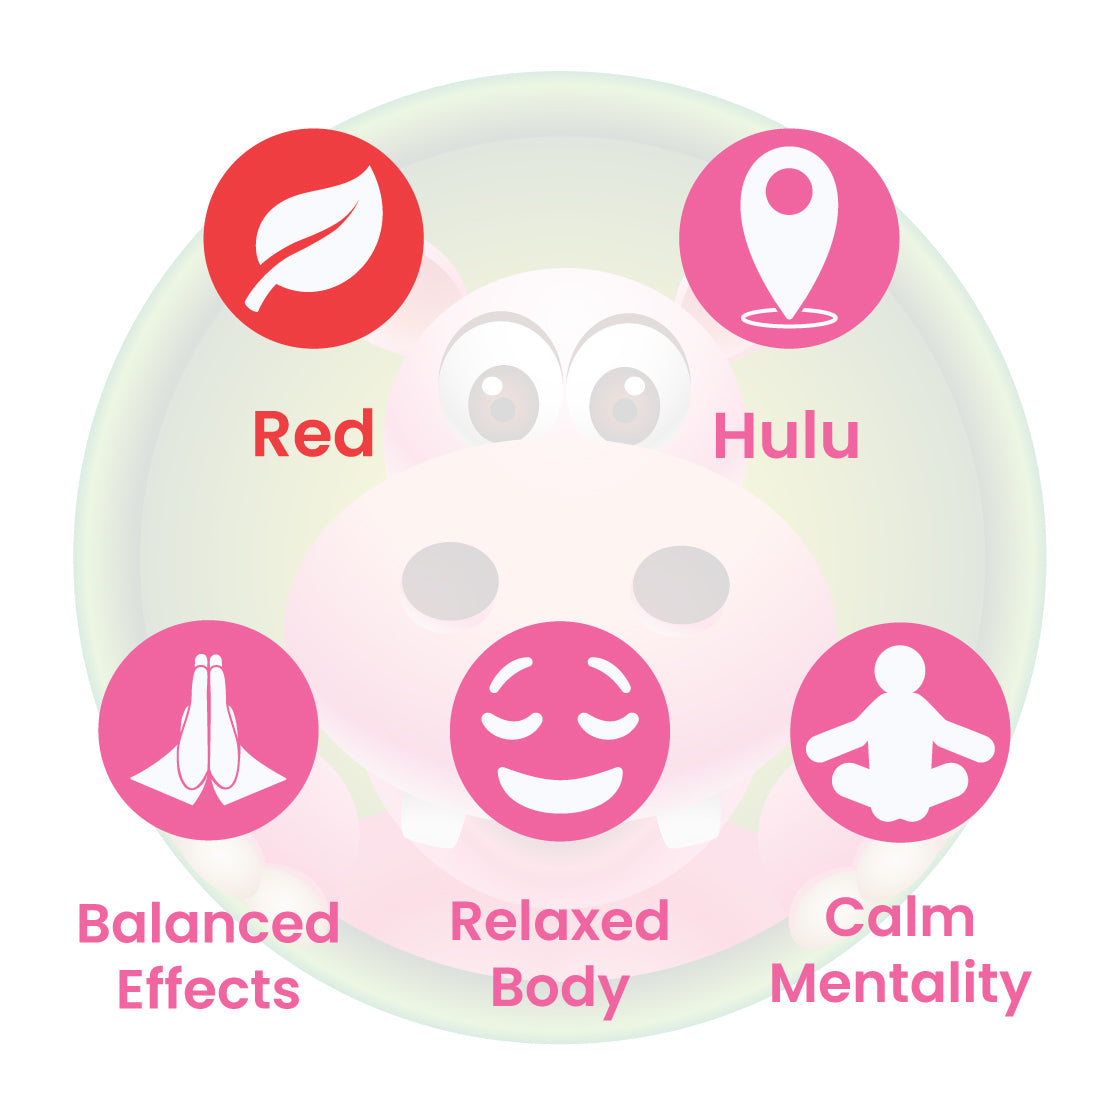 Infographic Details for Happy Hippo Red Vein Hulu Kratom Powder. Leaf color: Red Vein. Kratom Strain Origin: Hulu. Kratom Effects resonate with Balanced Effects, Relaxed Body, and Calm Mentality.